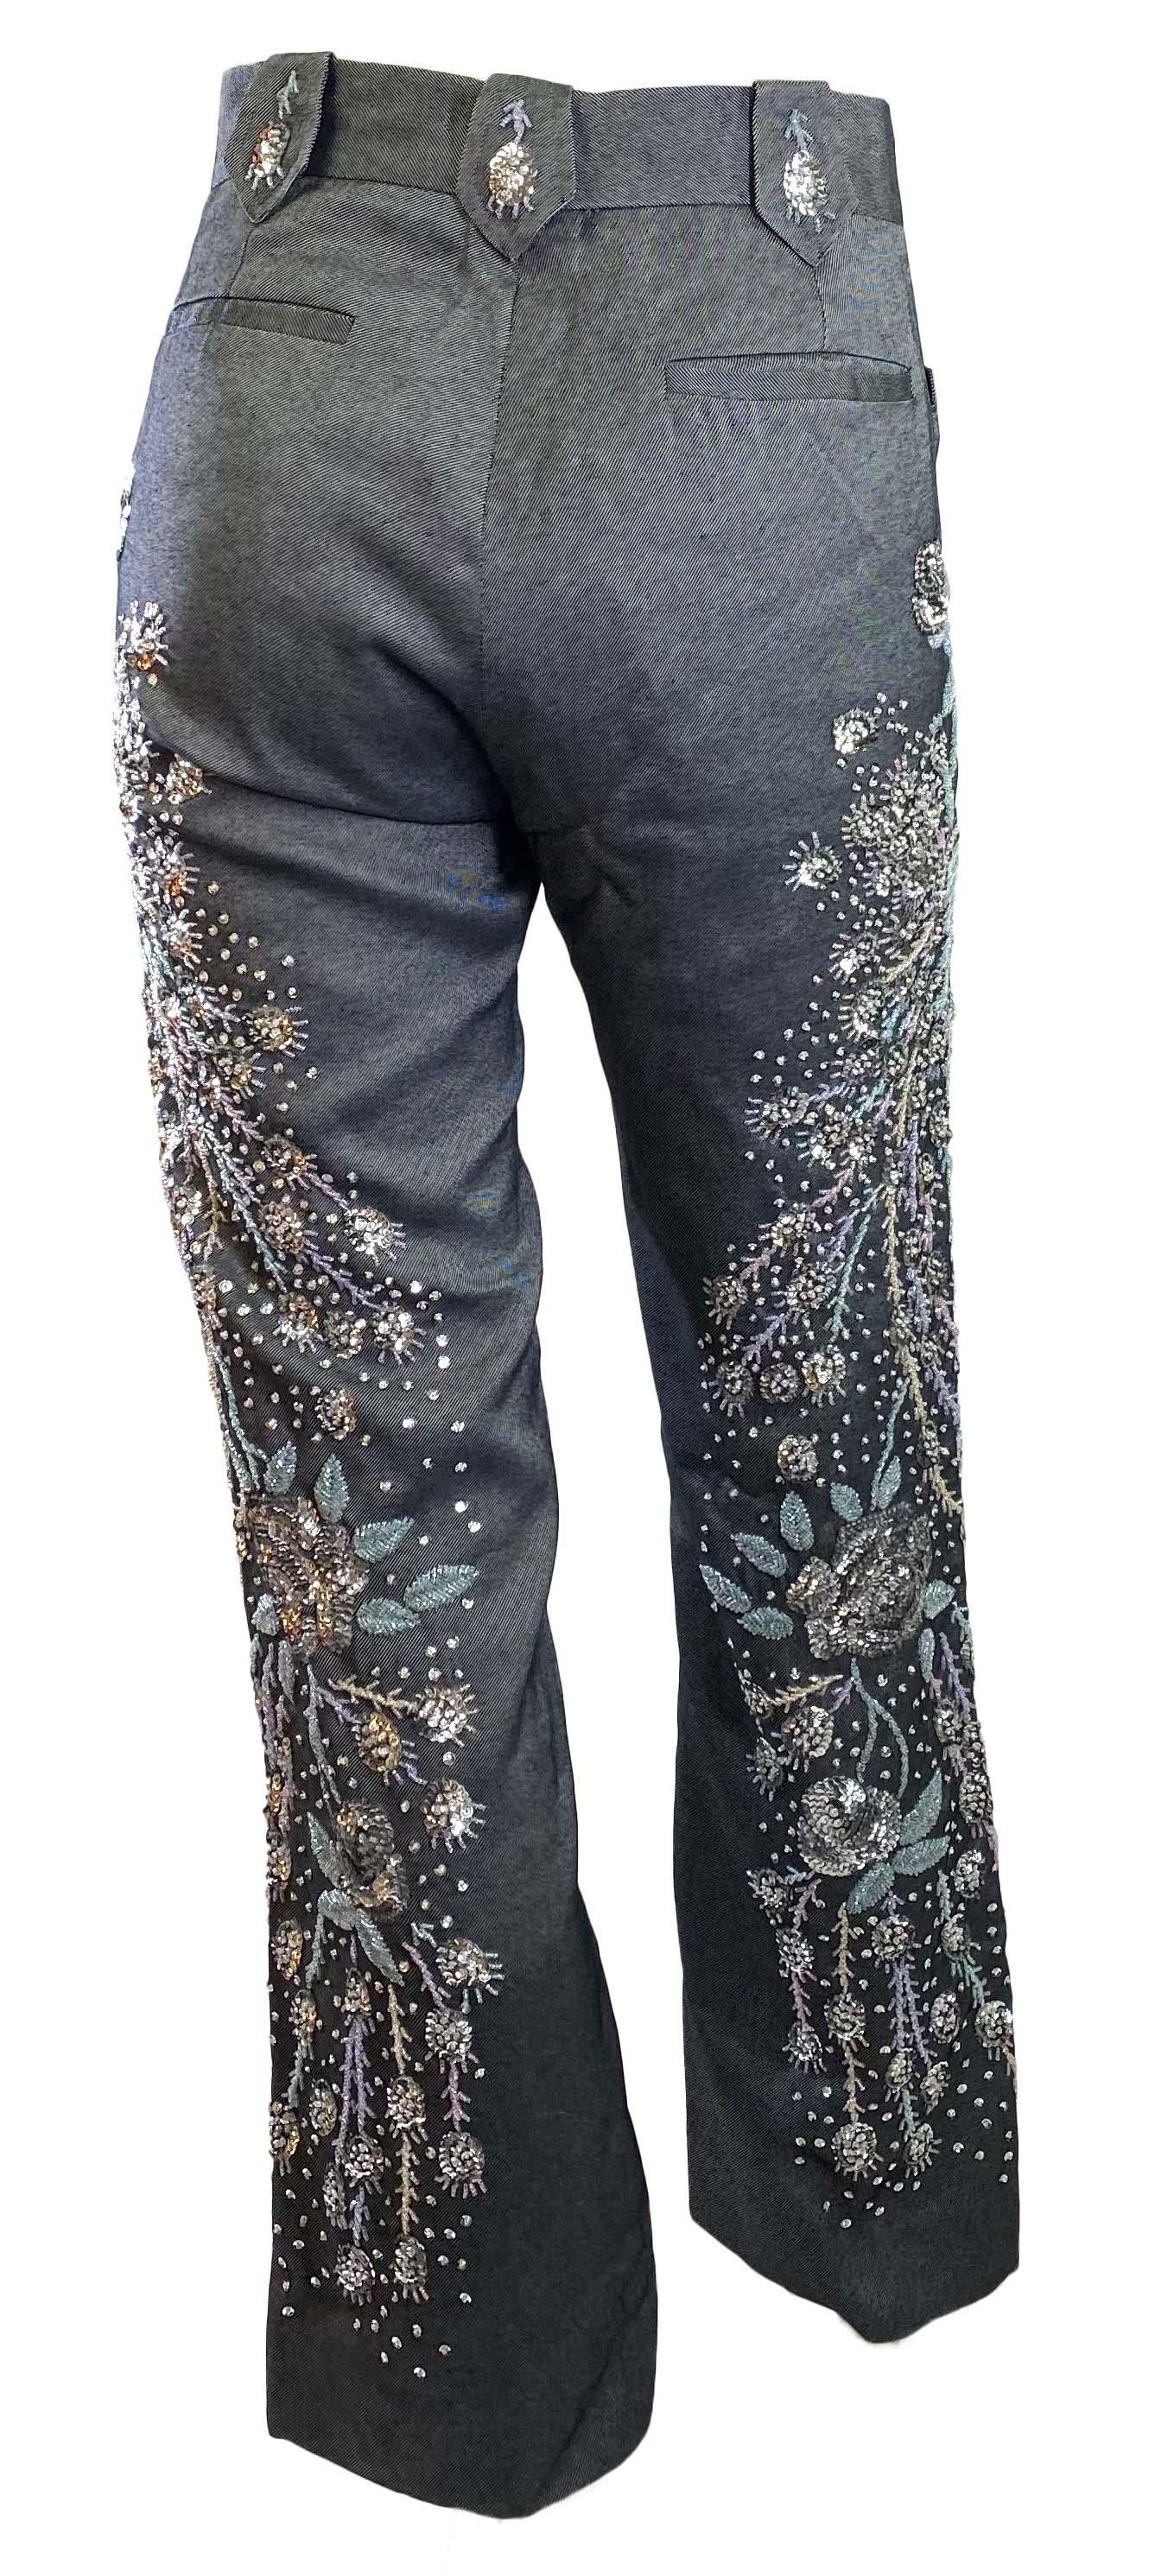 Women's or Men's S/S 1999 Gucci by Tom Ford Runway Finale Peacock Beaded Silk Pants Documented For Sale